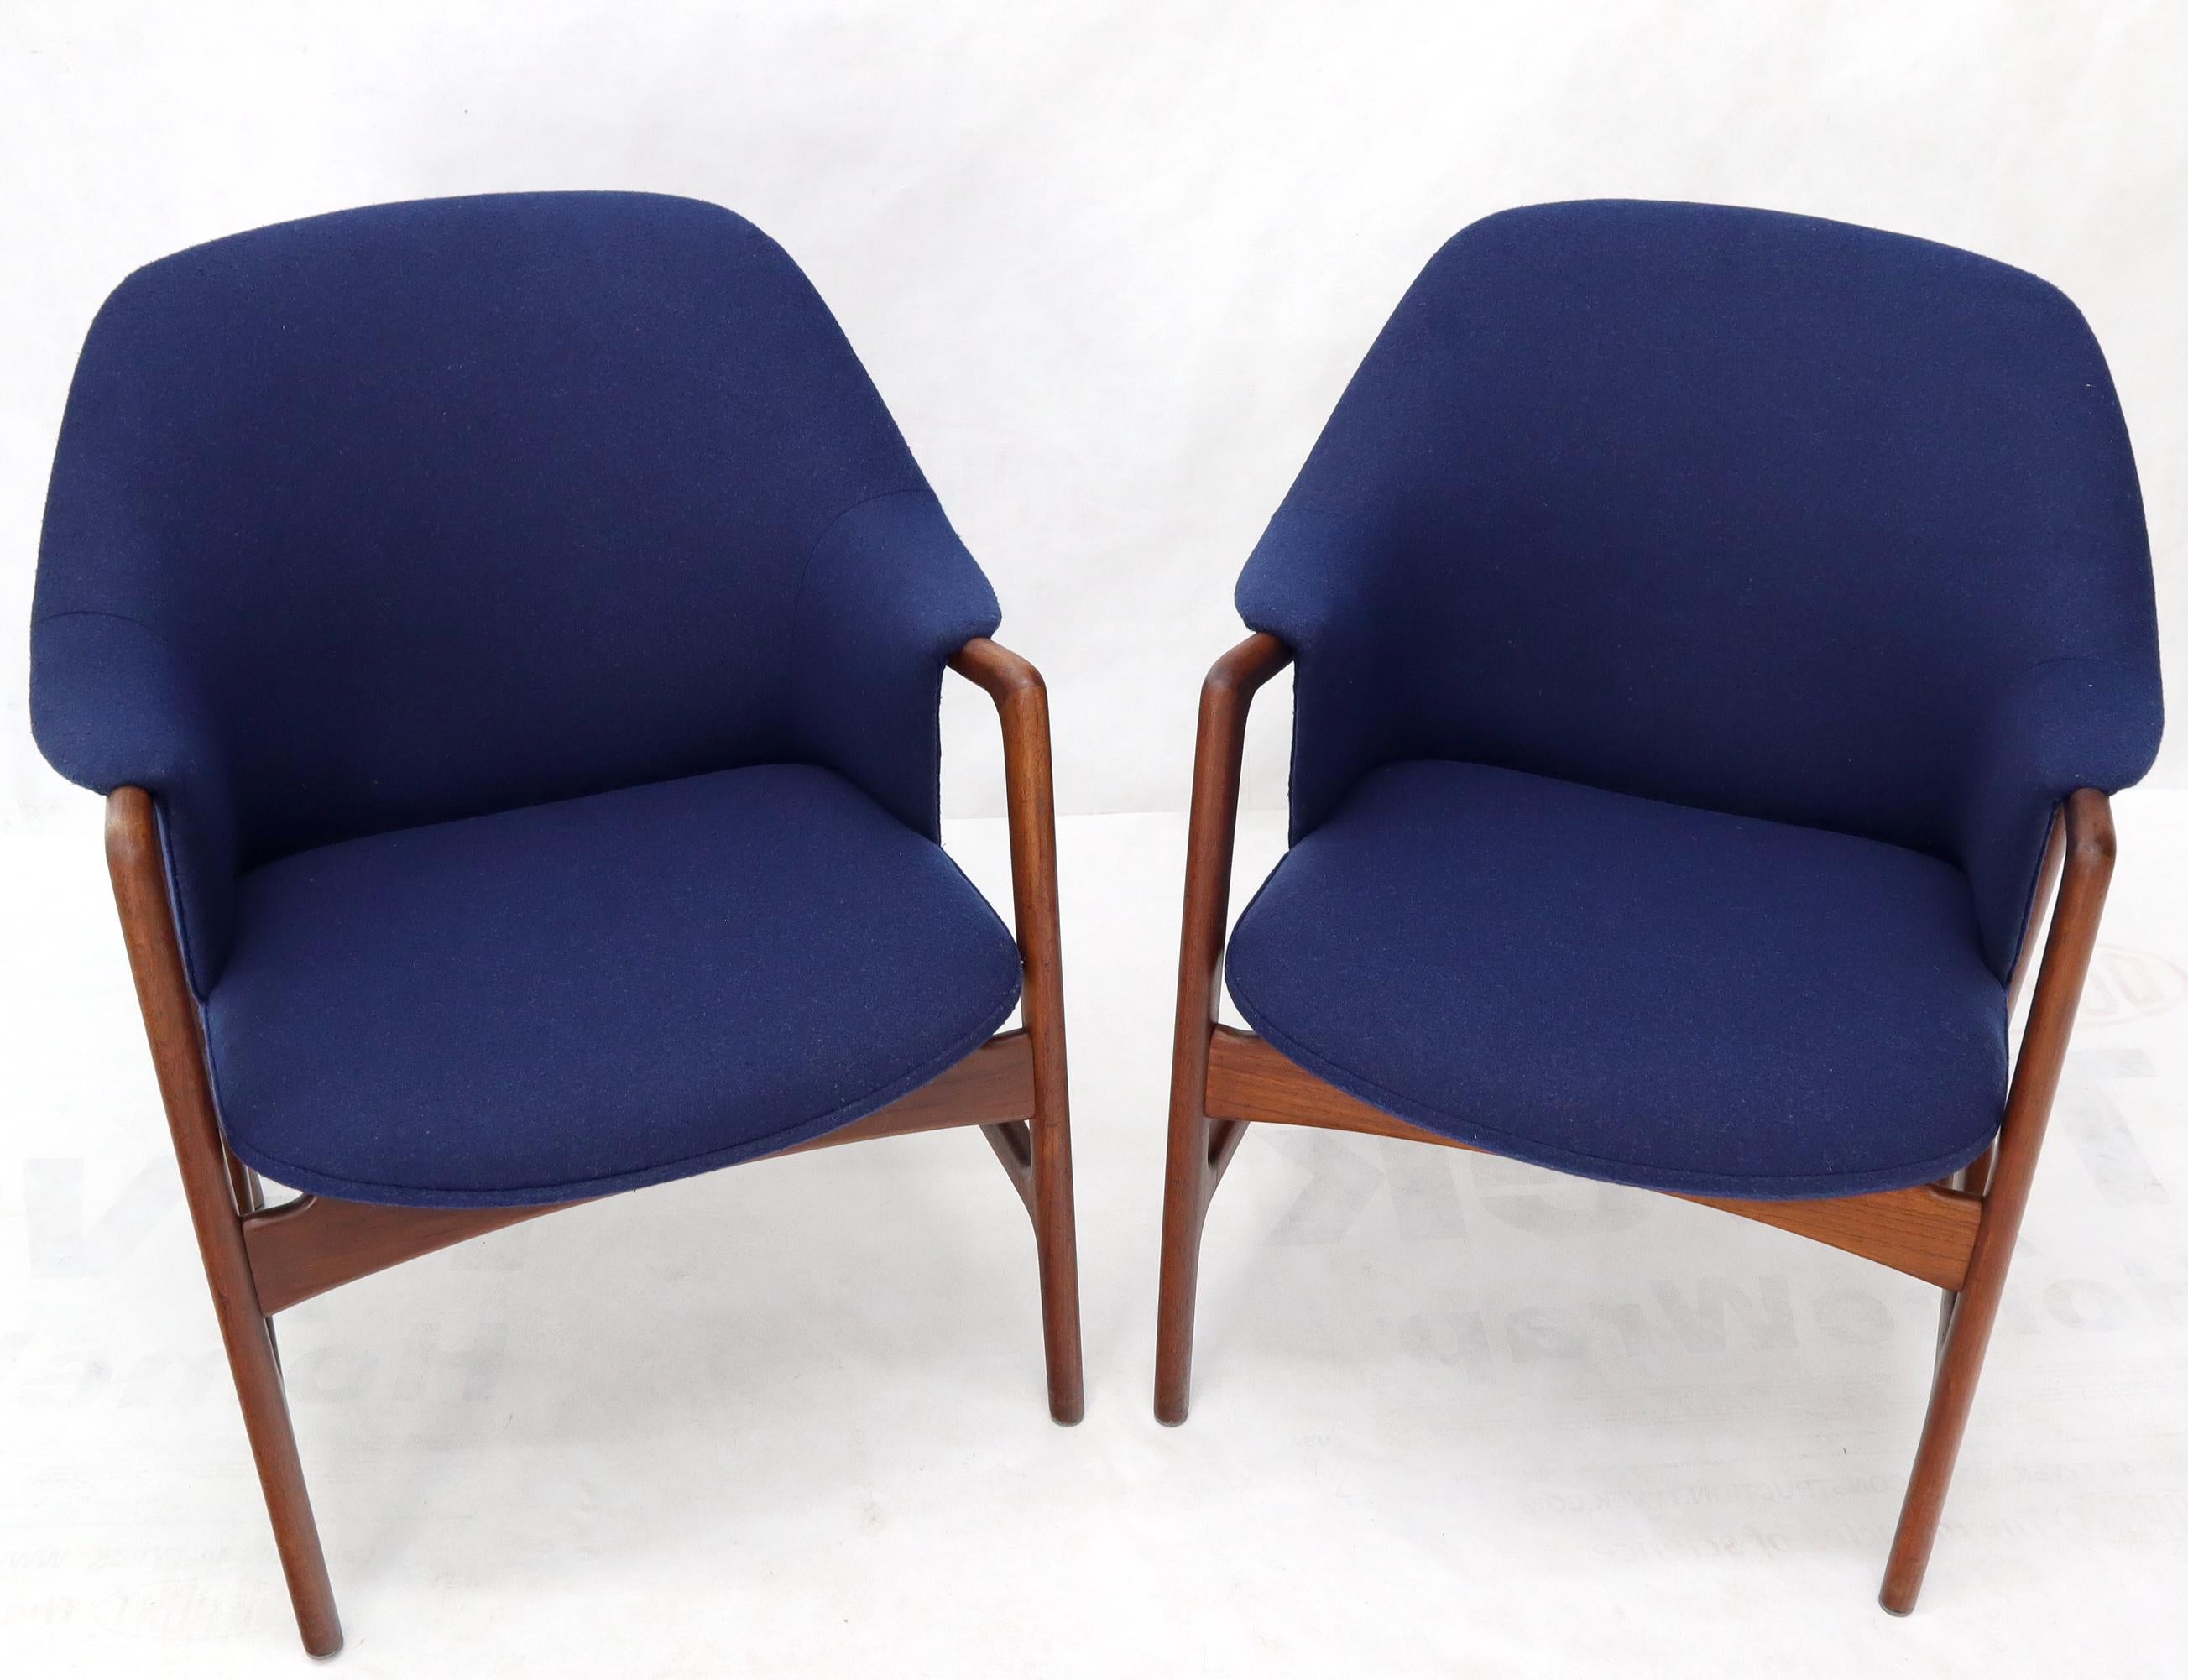 New Blue Wool Upholstery Teak Frames Danish Mid-Century Modern Lounge Chairs In Good Condition For Sale In Rockaway, NJ